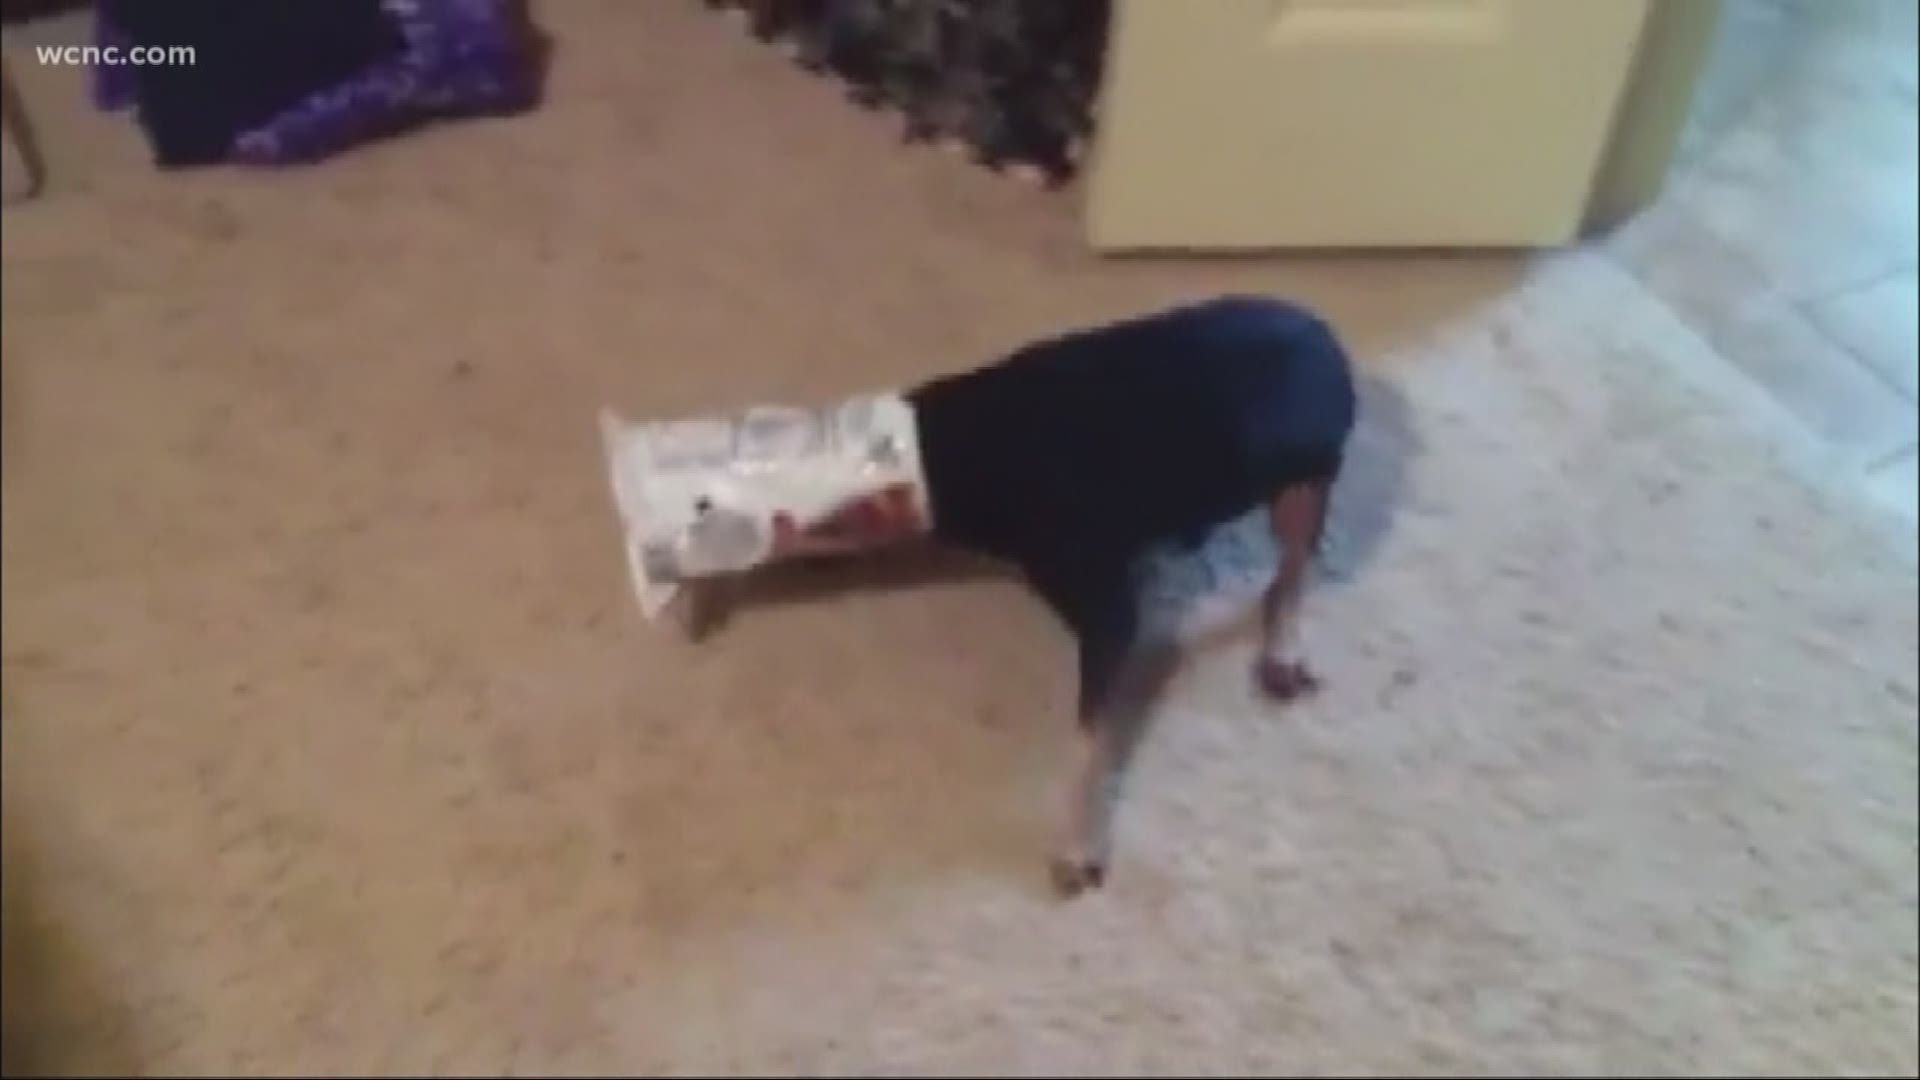 One dog owner came home from work Monday to discover her dog dead, his head inside an empty chip bag.